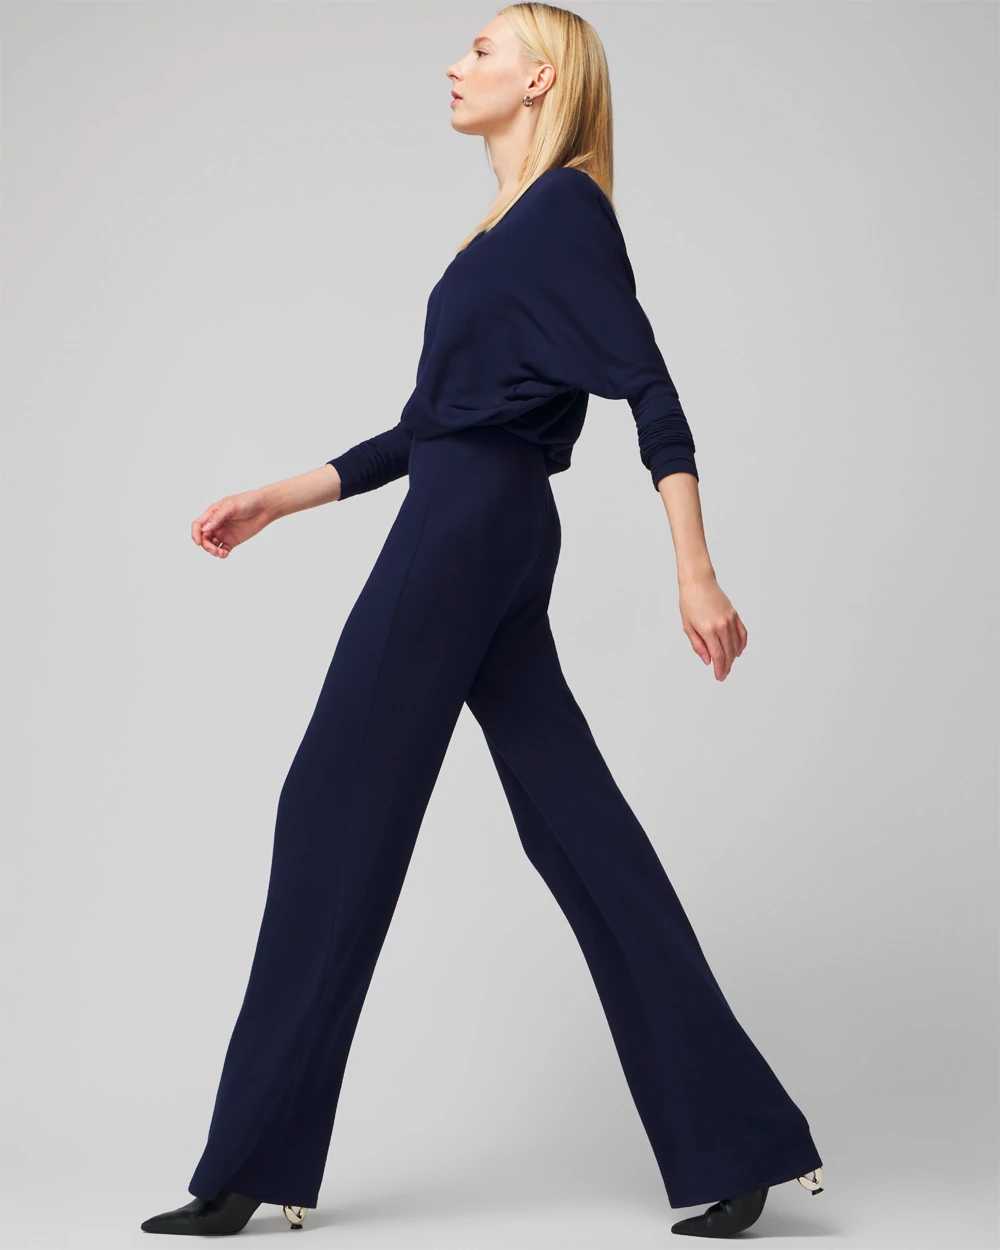 The Passporter   Slip On Wide Leg Pants click to view larger image.